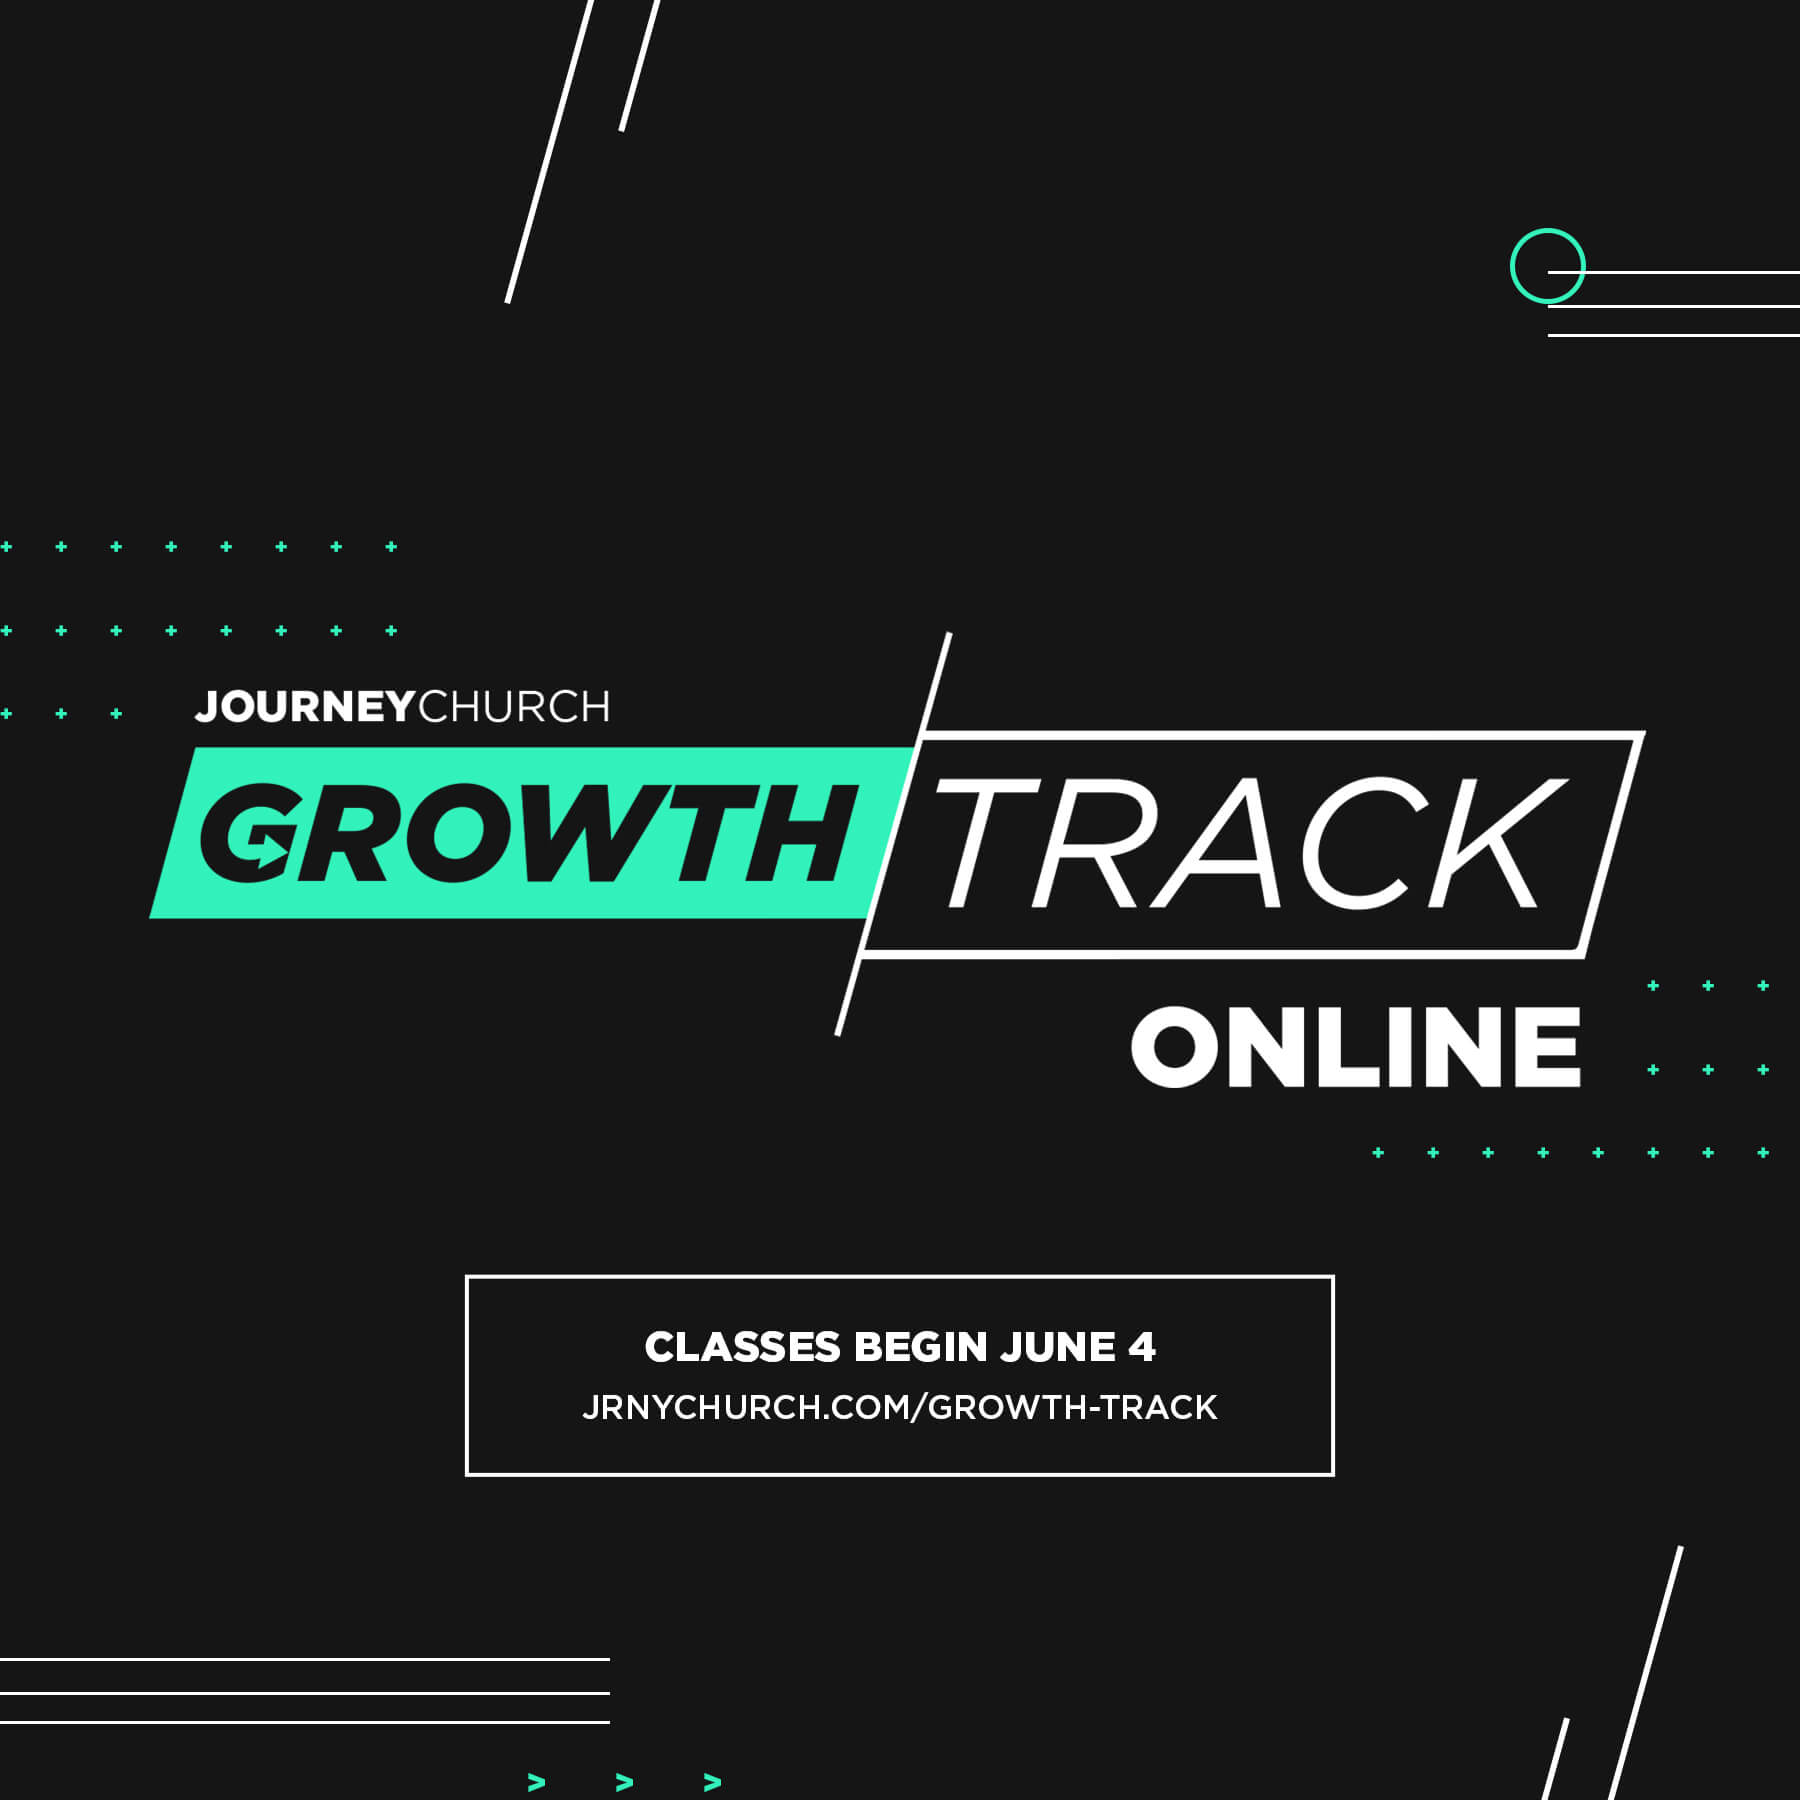 Online Growth Track